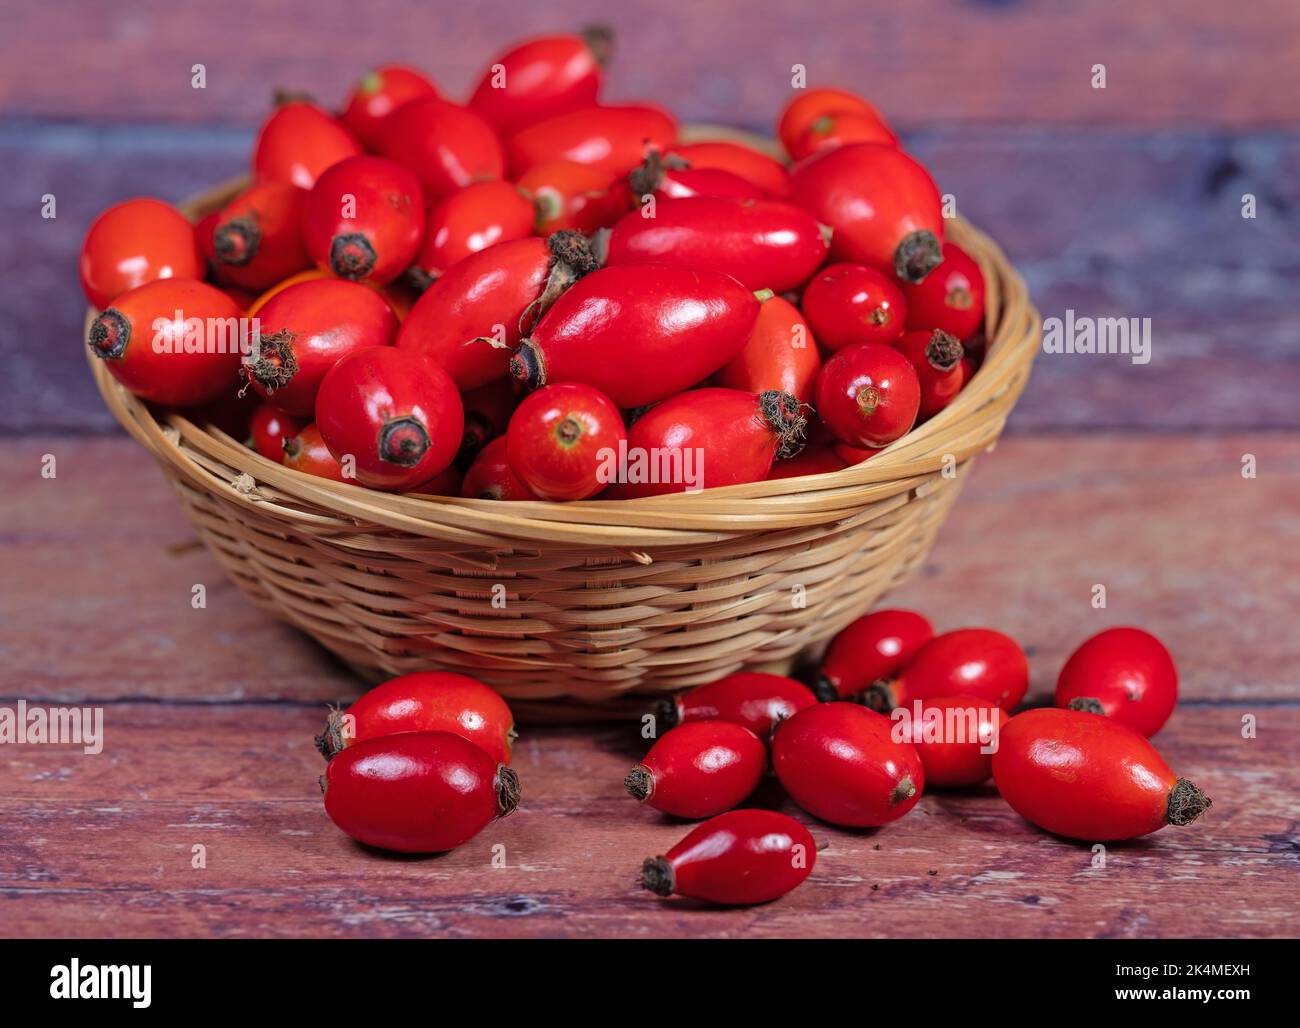 Ripe rose hips in the basket Stock Photo